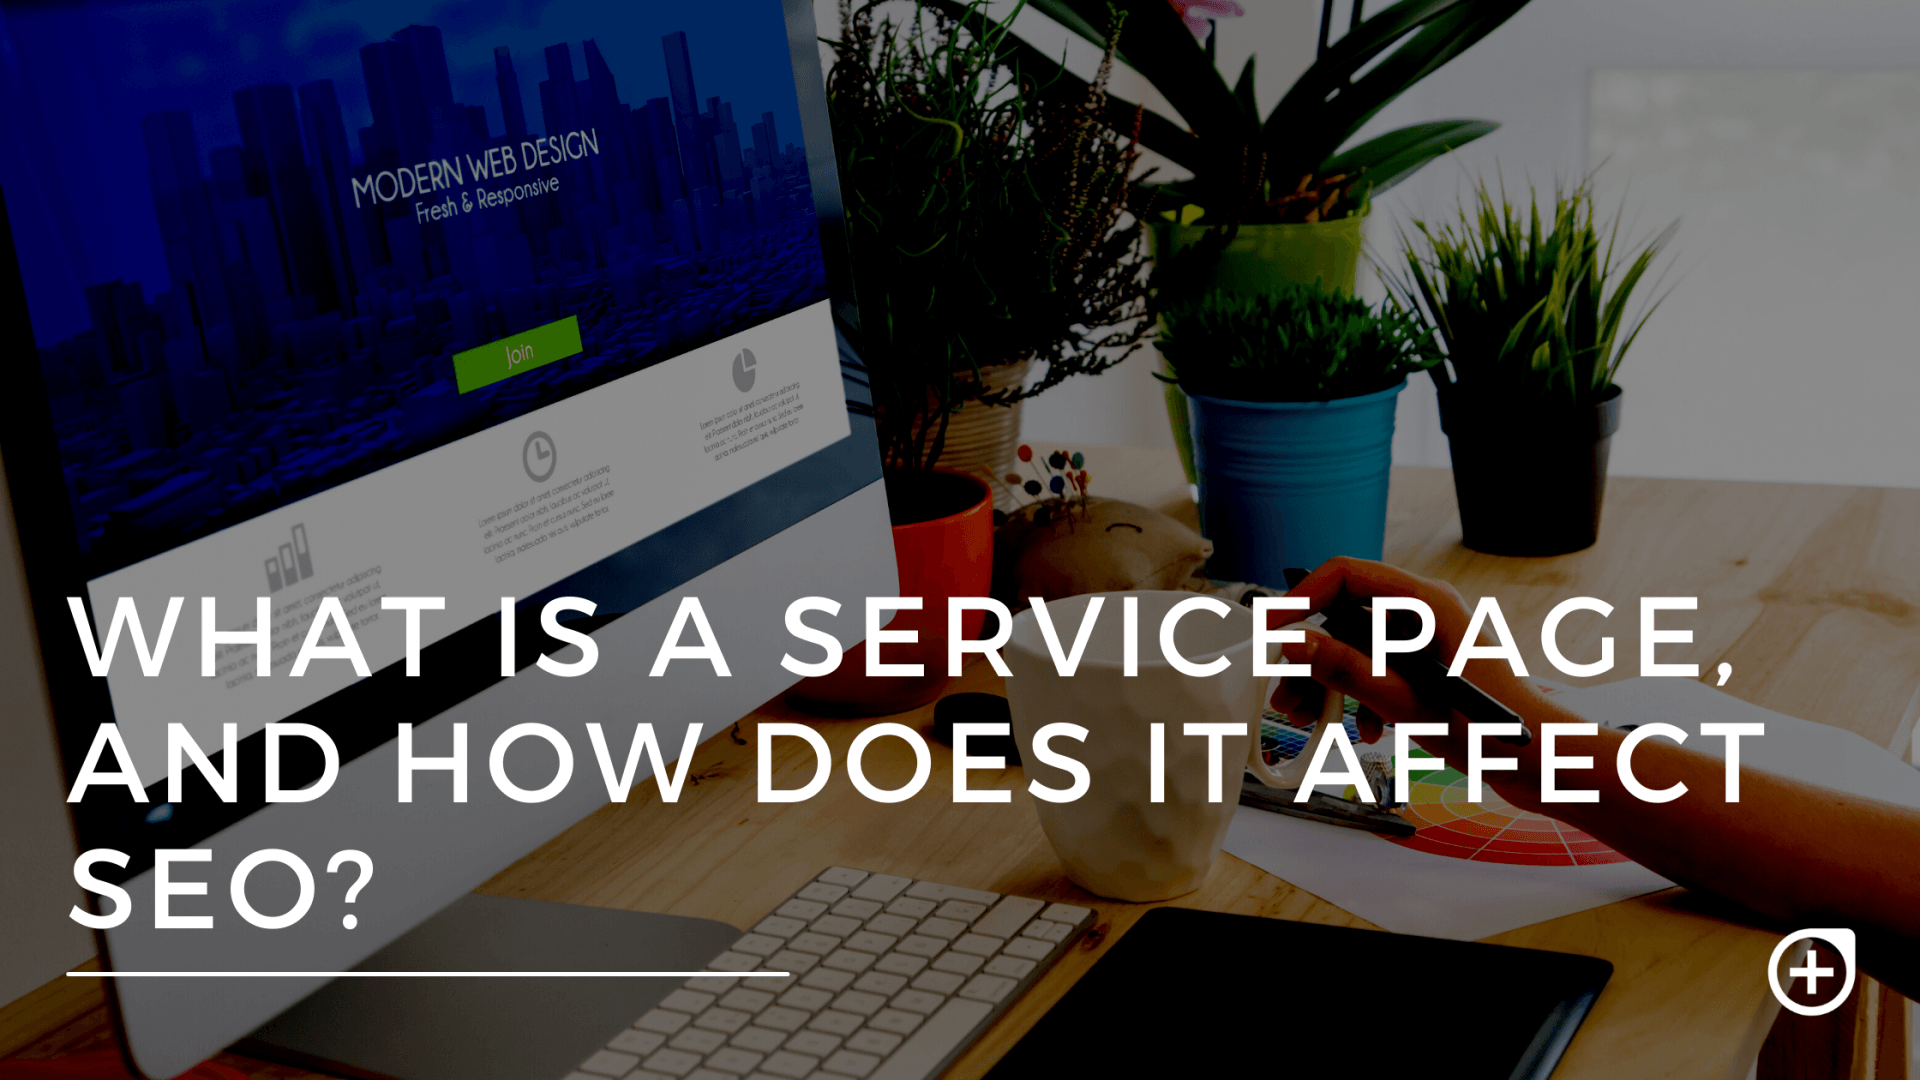 Service Pages and SEO